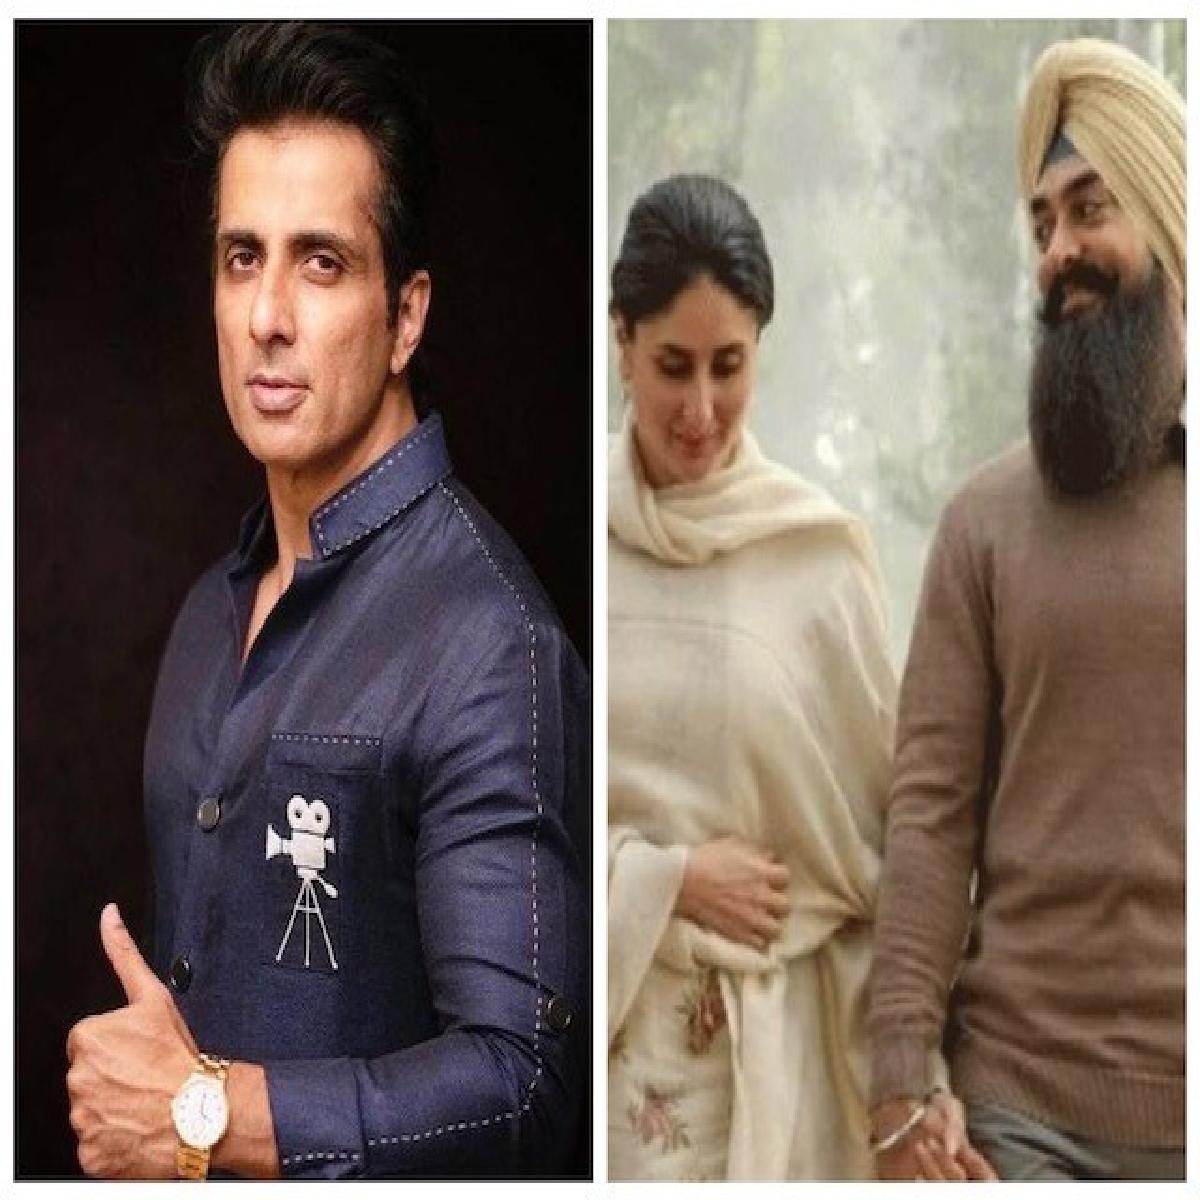 A Film Should Get Its Due Credit Says Sonu Sood On Laal Singh Chaddha Row